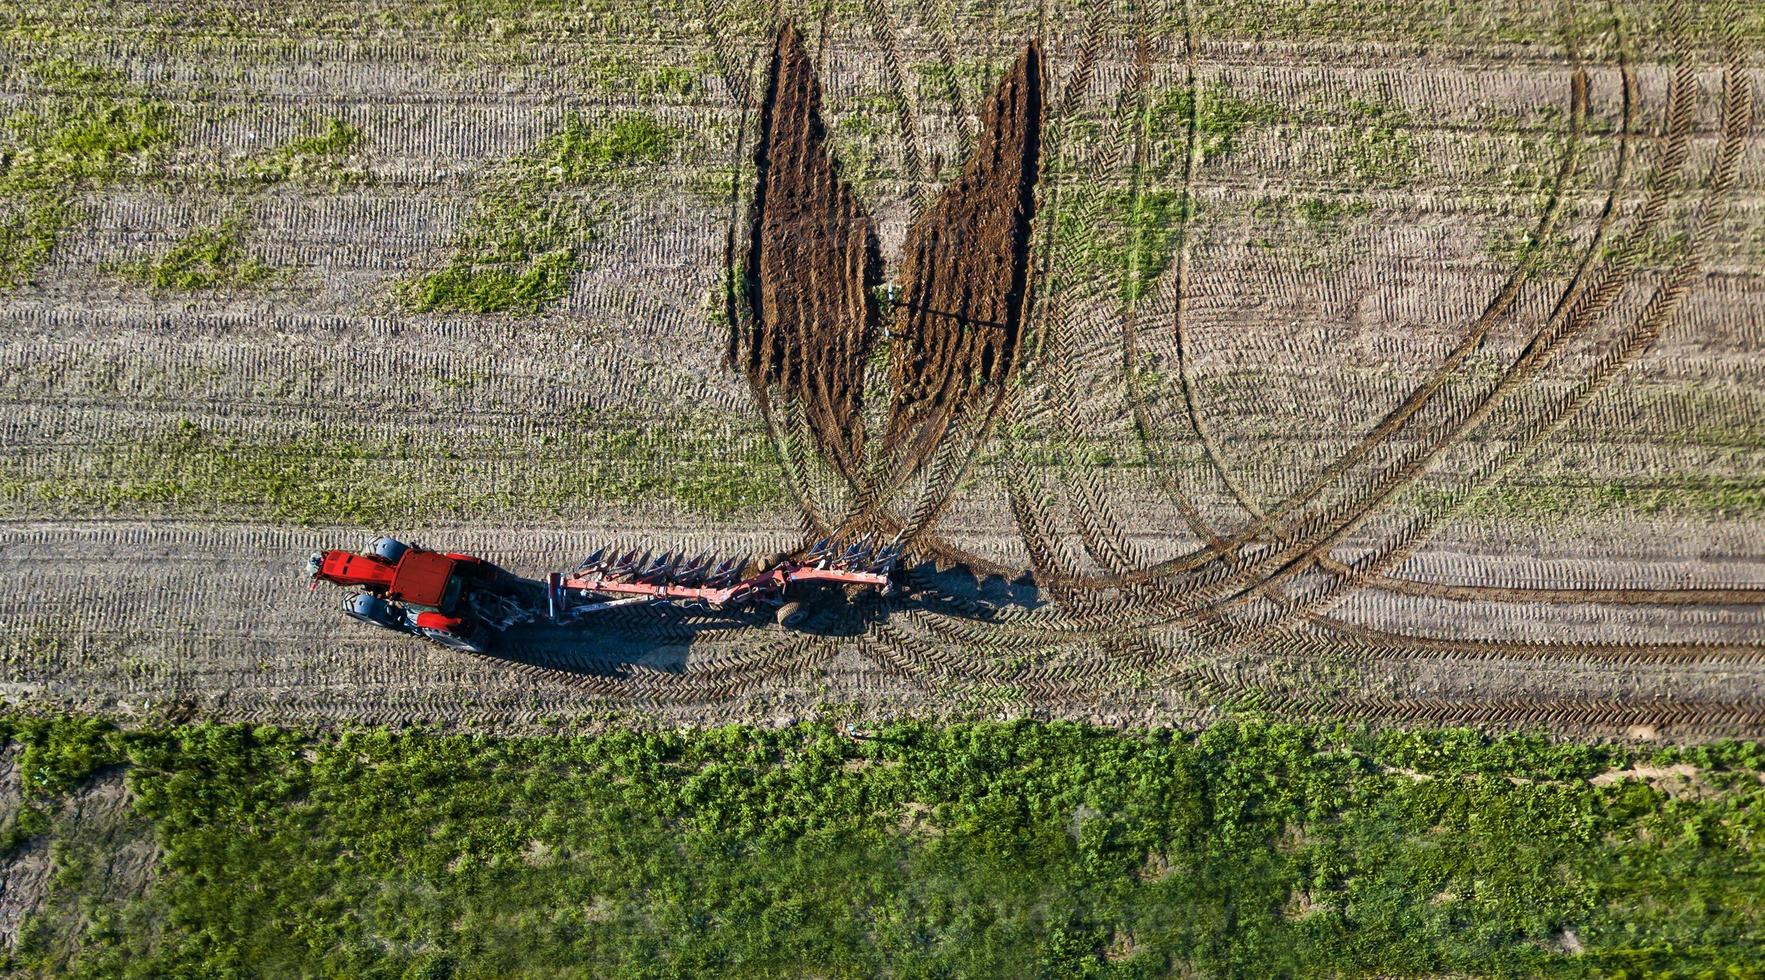 creative tractor driver drew a butterfly on the field aerial view photo